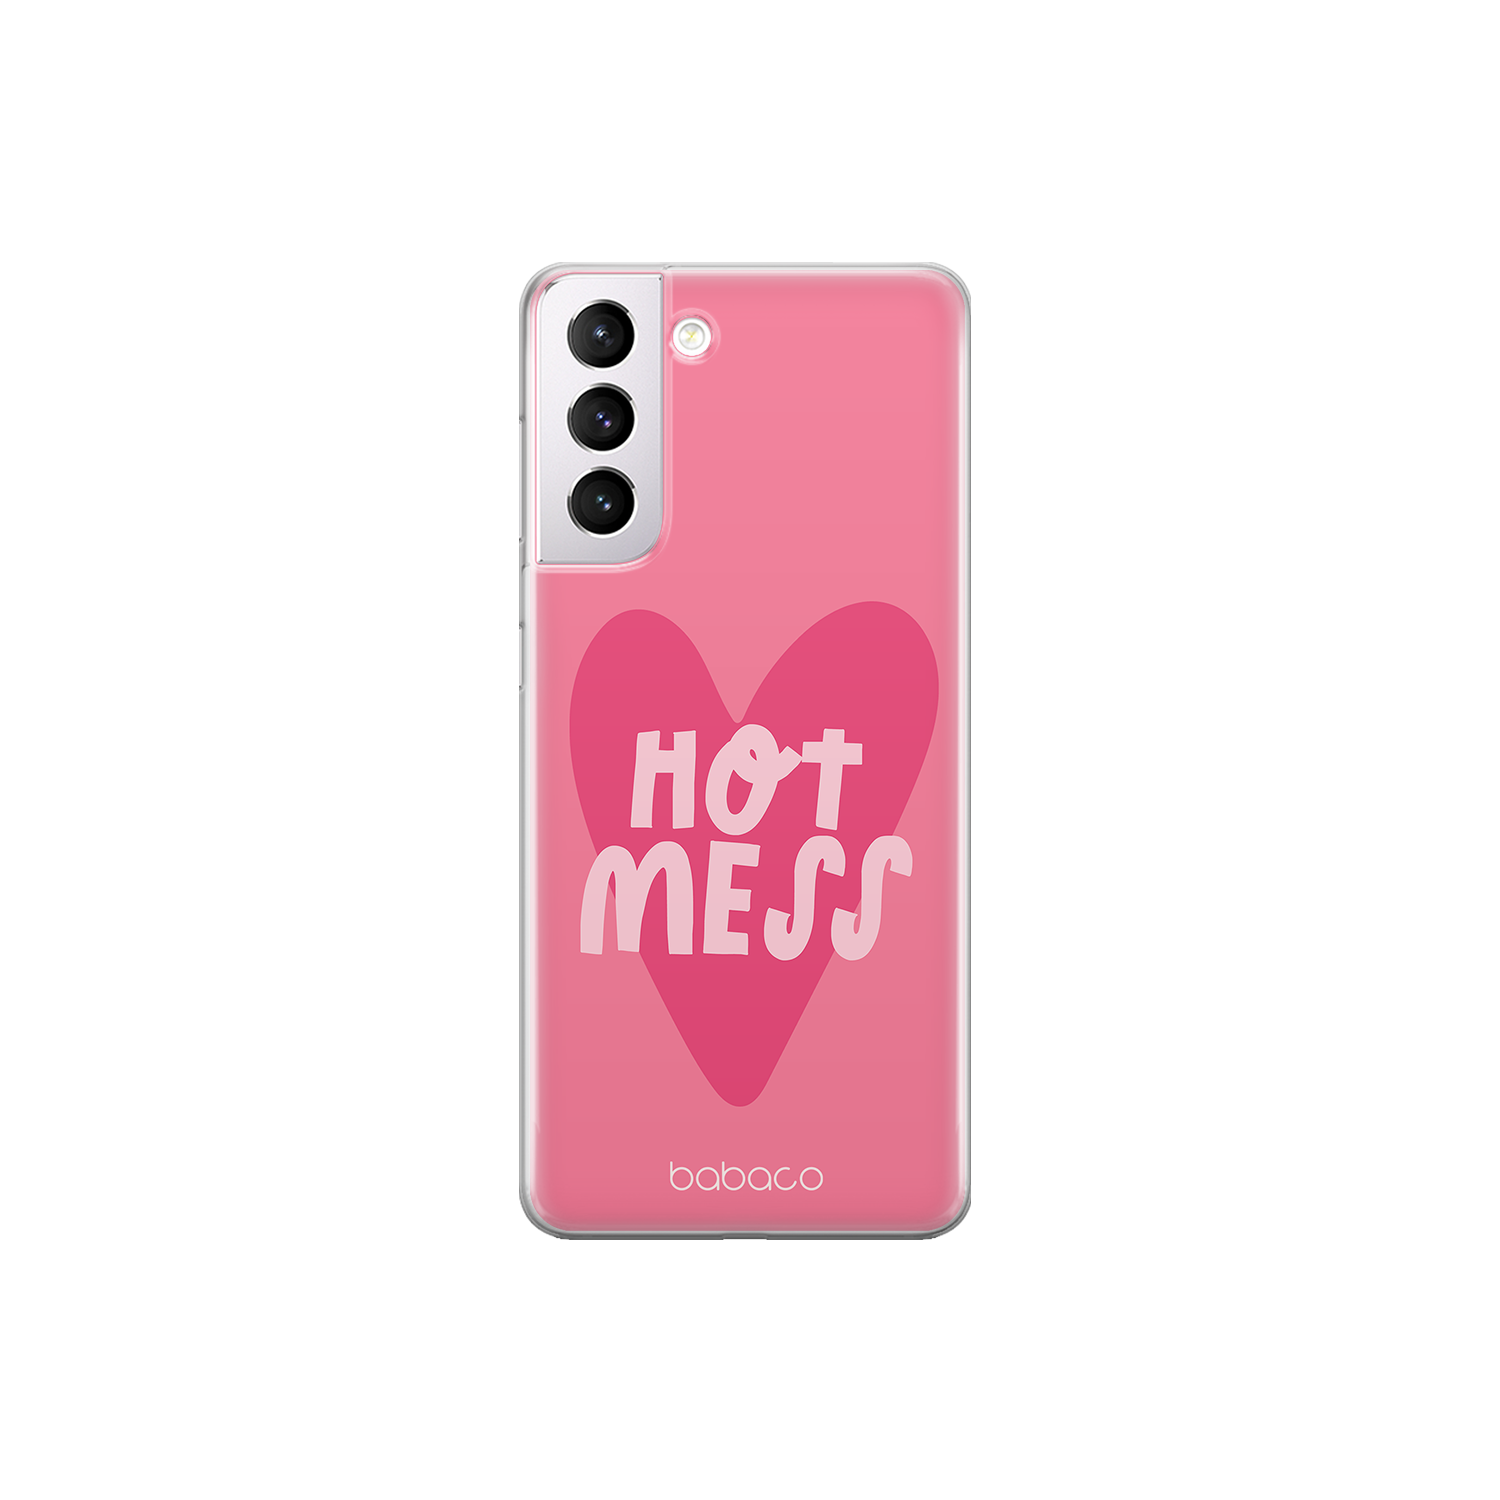 Babaco Case for SAMSUNG S21 PLUS pattern: Hot Mess 001